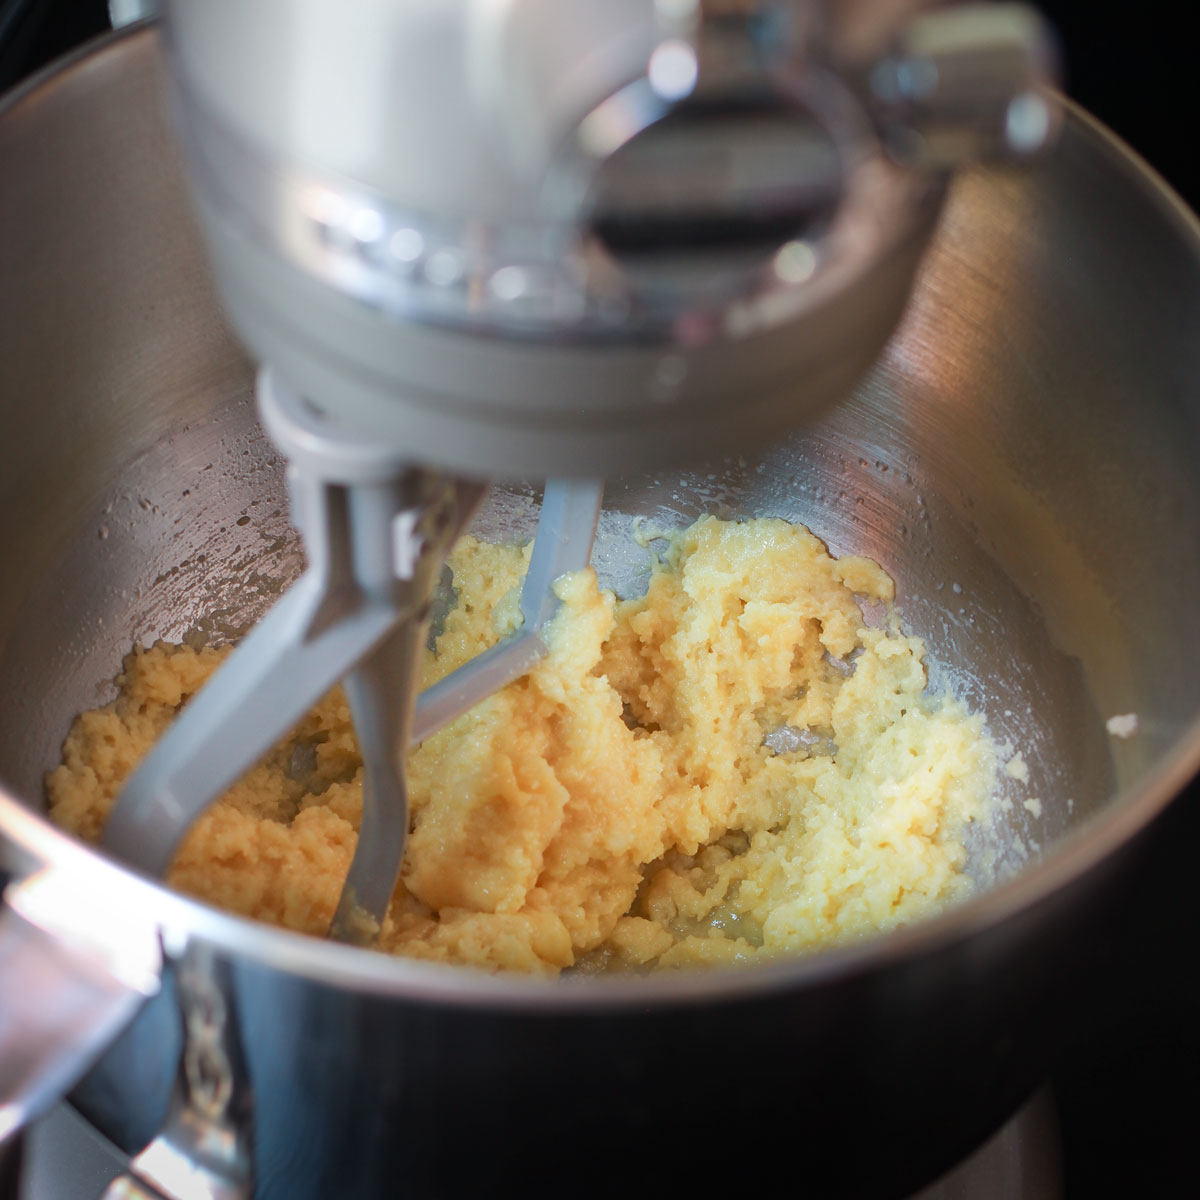 paddle attachment in the mixer bowl with the batter.